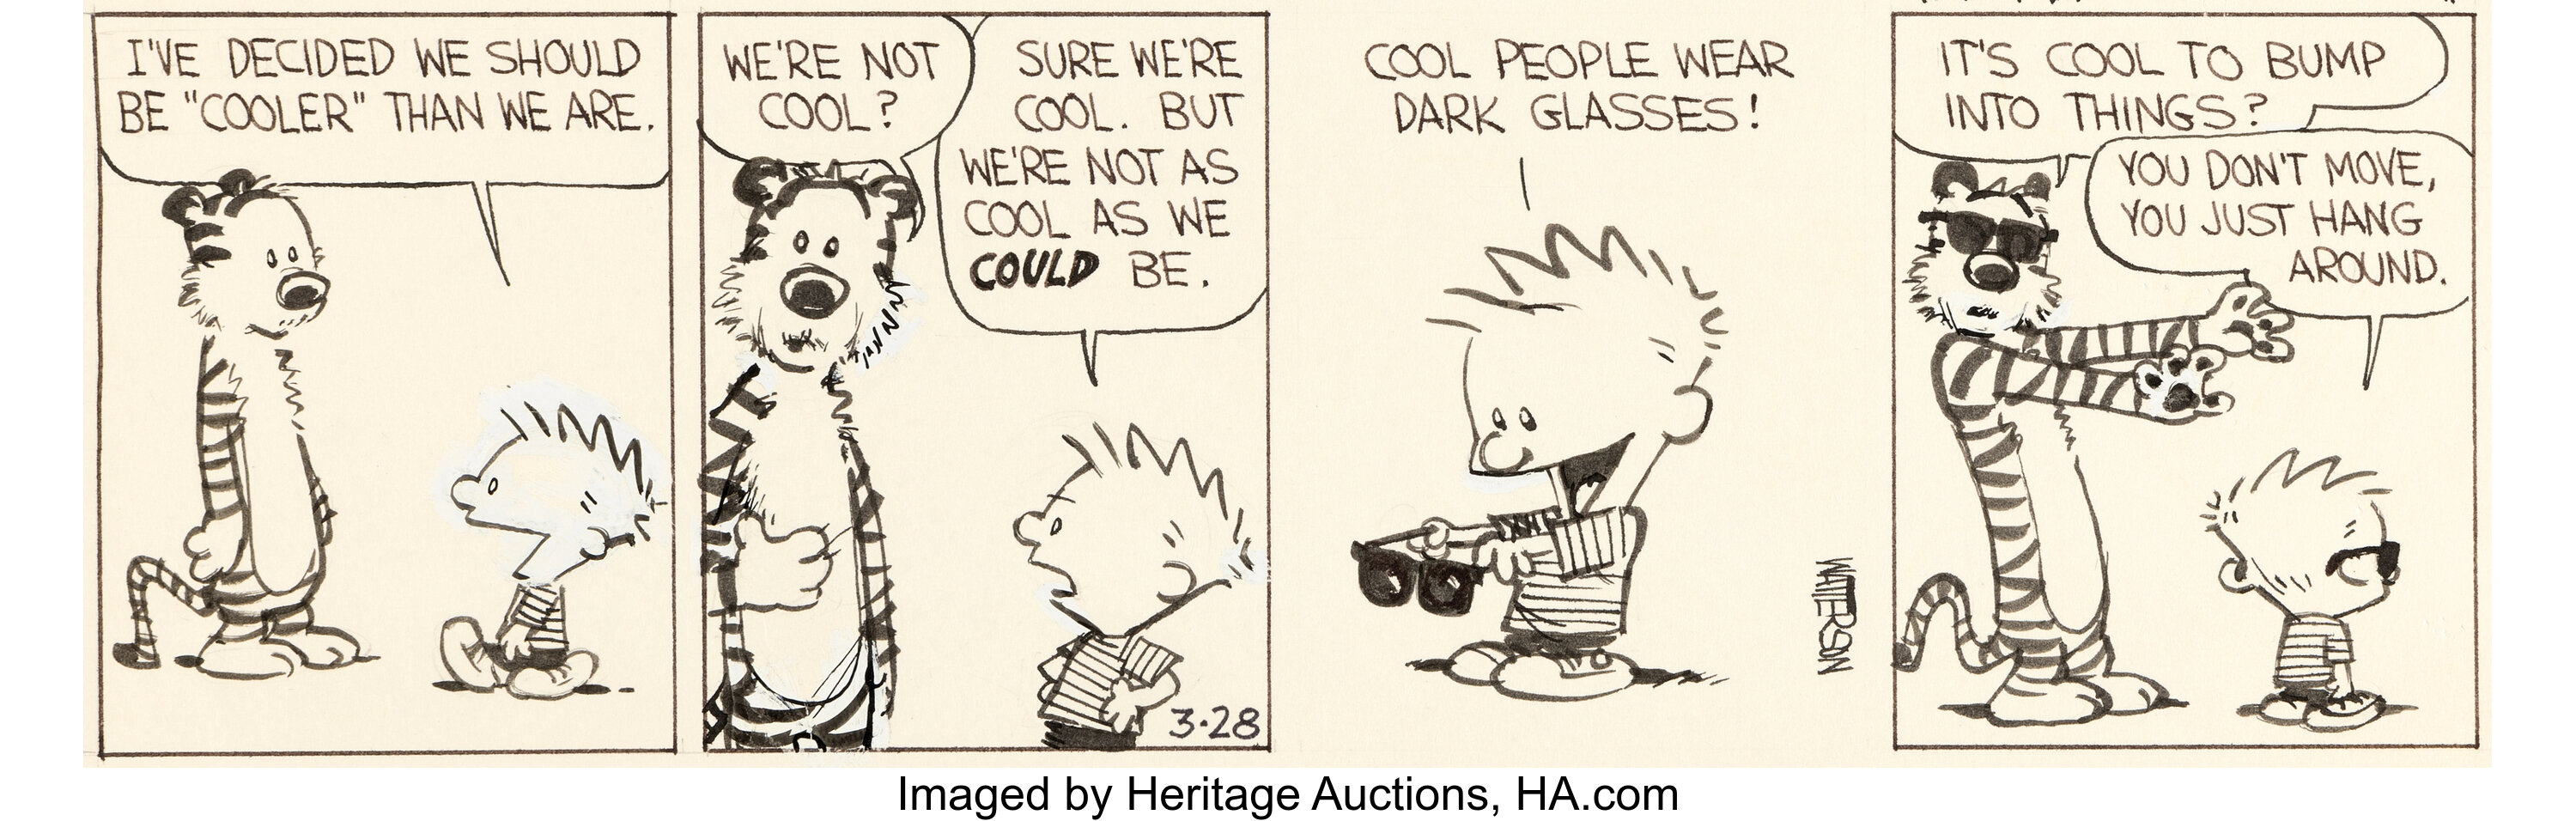 Bill Watterson Calvin And Hobbes Daily Comic Strip Original Art Lot 91031 Heritage Auctions 7520